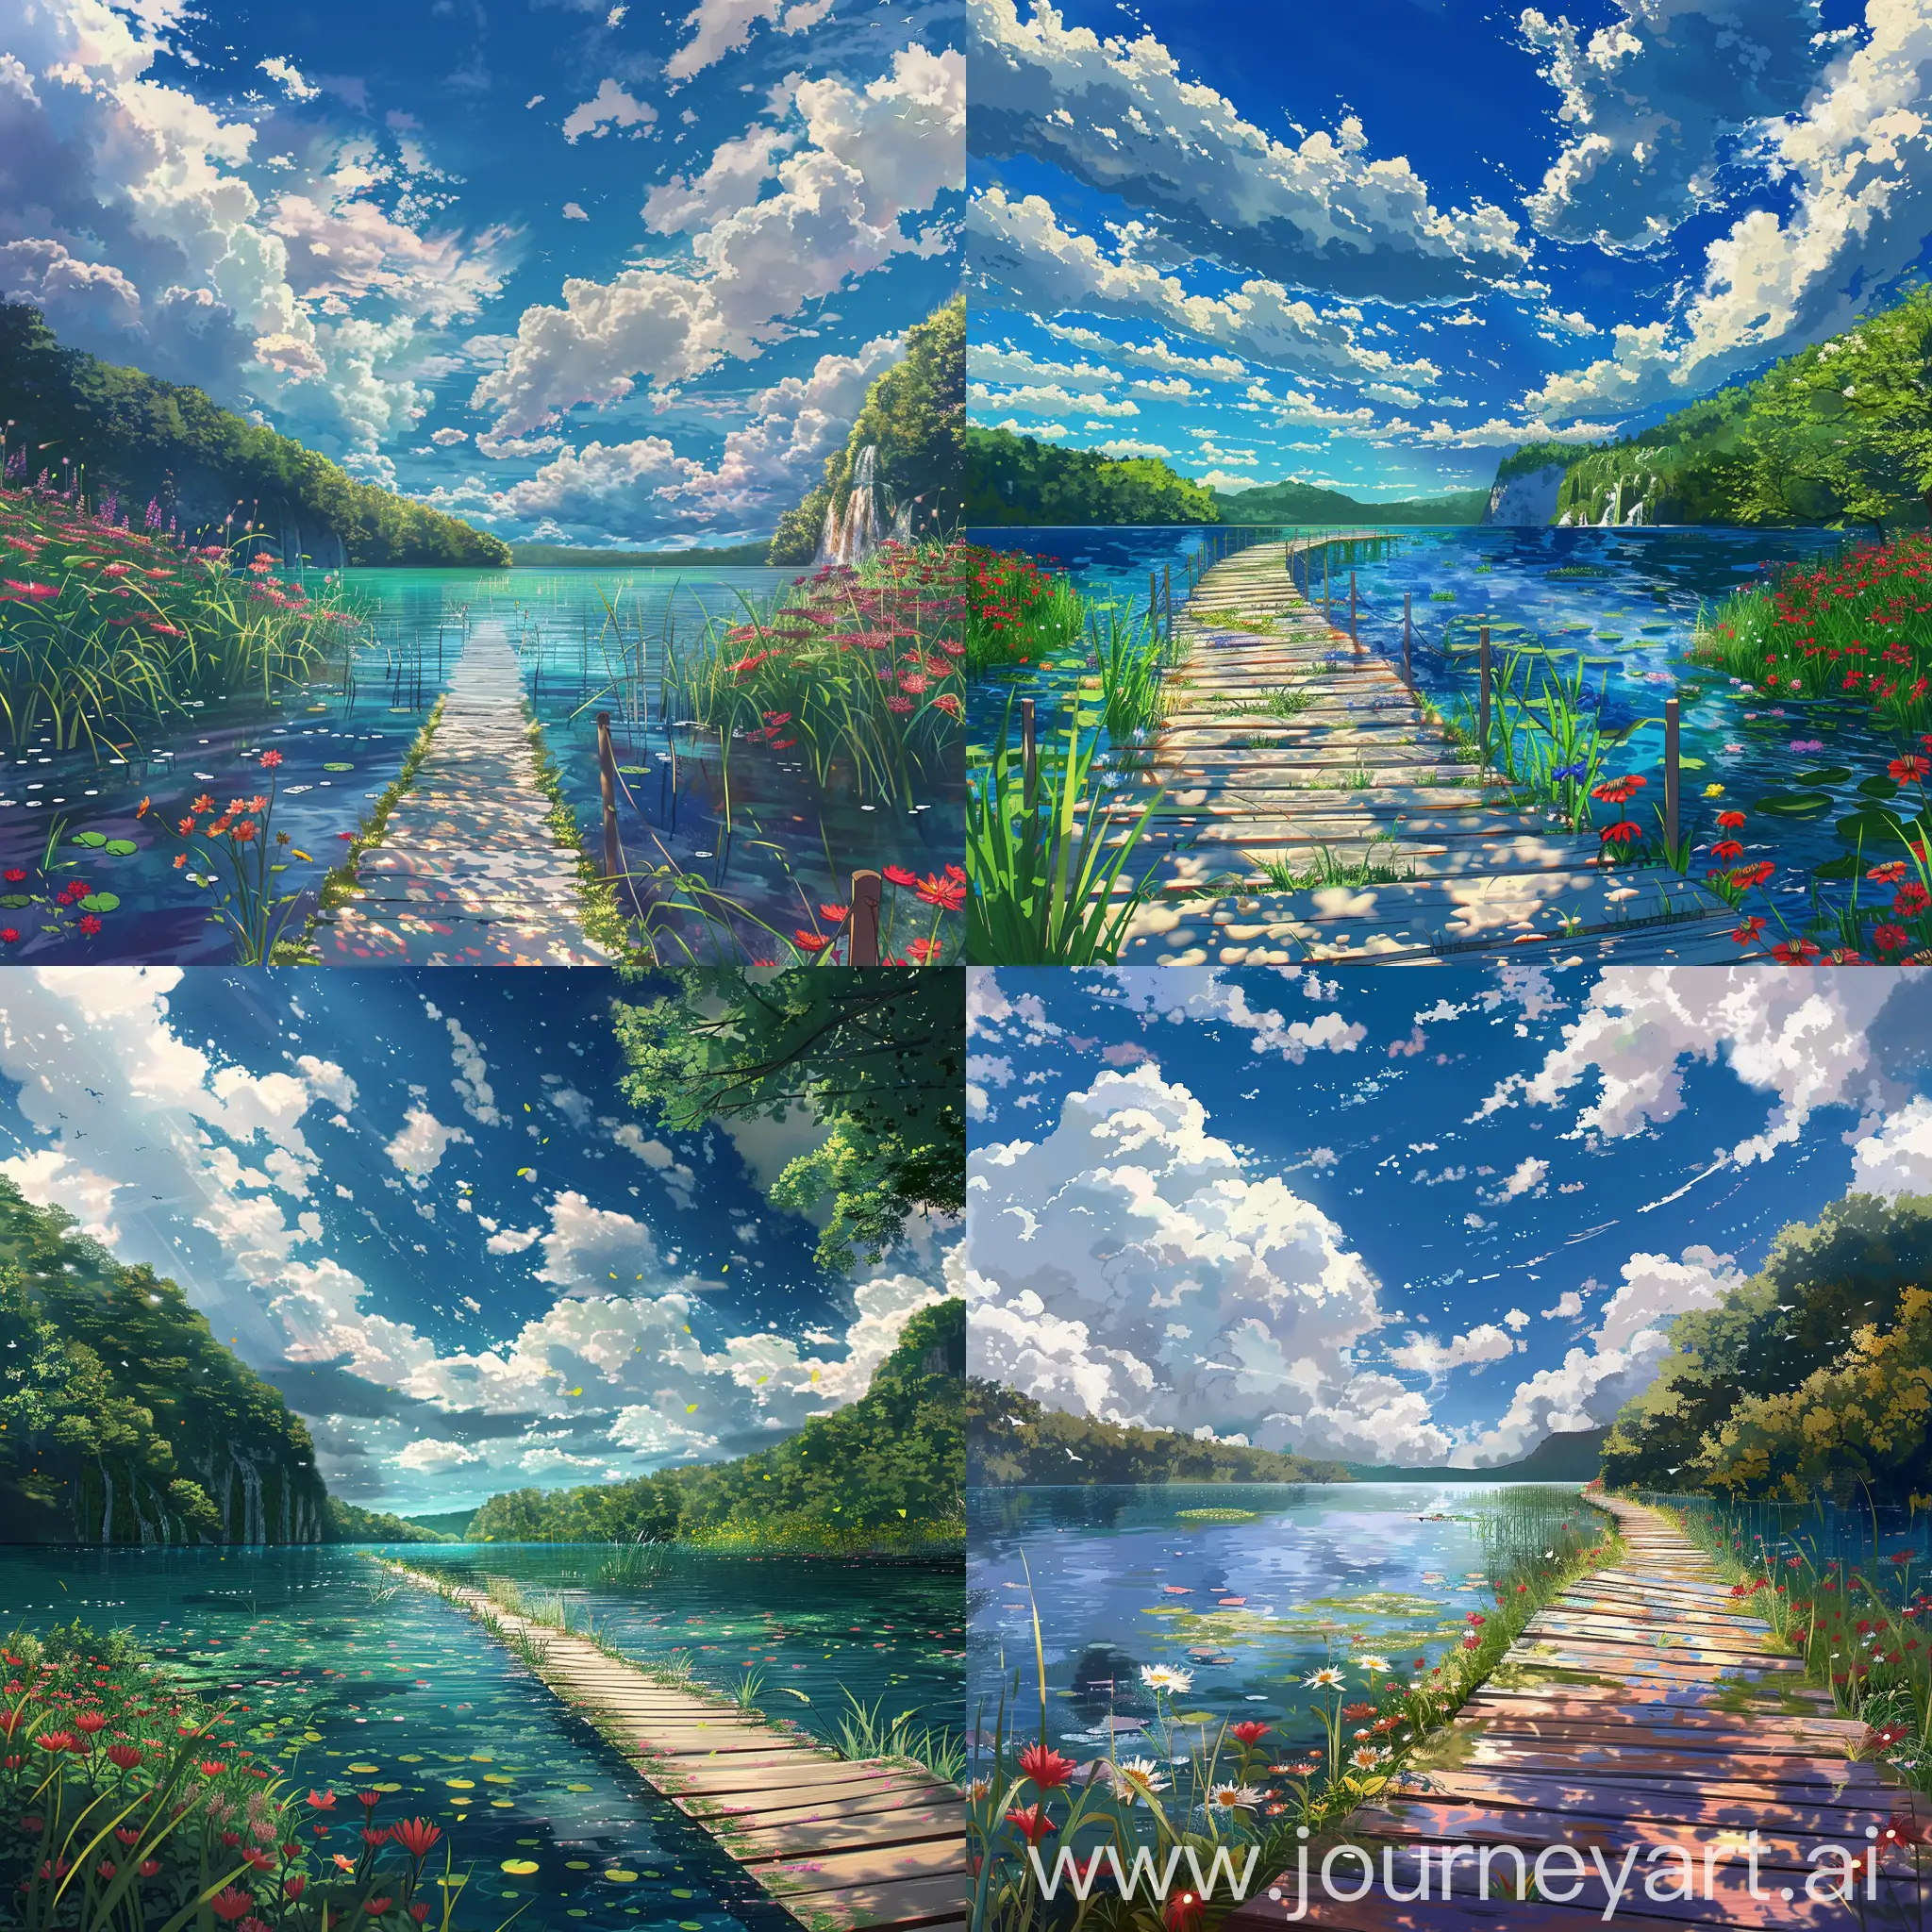 anime, Makoto Shinkai style, lost in the wonders of nature, where air and water have a seamless flow, clouds are fluffy, sky is beautiful, vibrant flowers, a little bit of grass, inspired from one of the most beautiful walkways in the world. Plitvice Lakes National Park, Croatia, everything is highly detailed, water is beautiful, nature's wonder